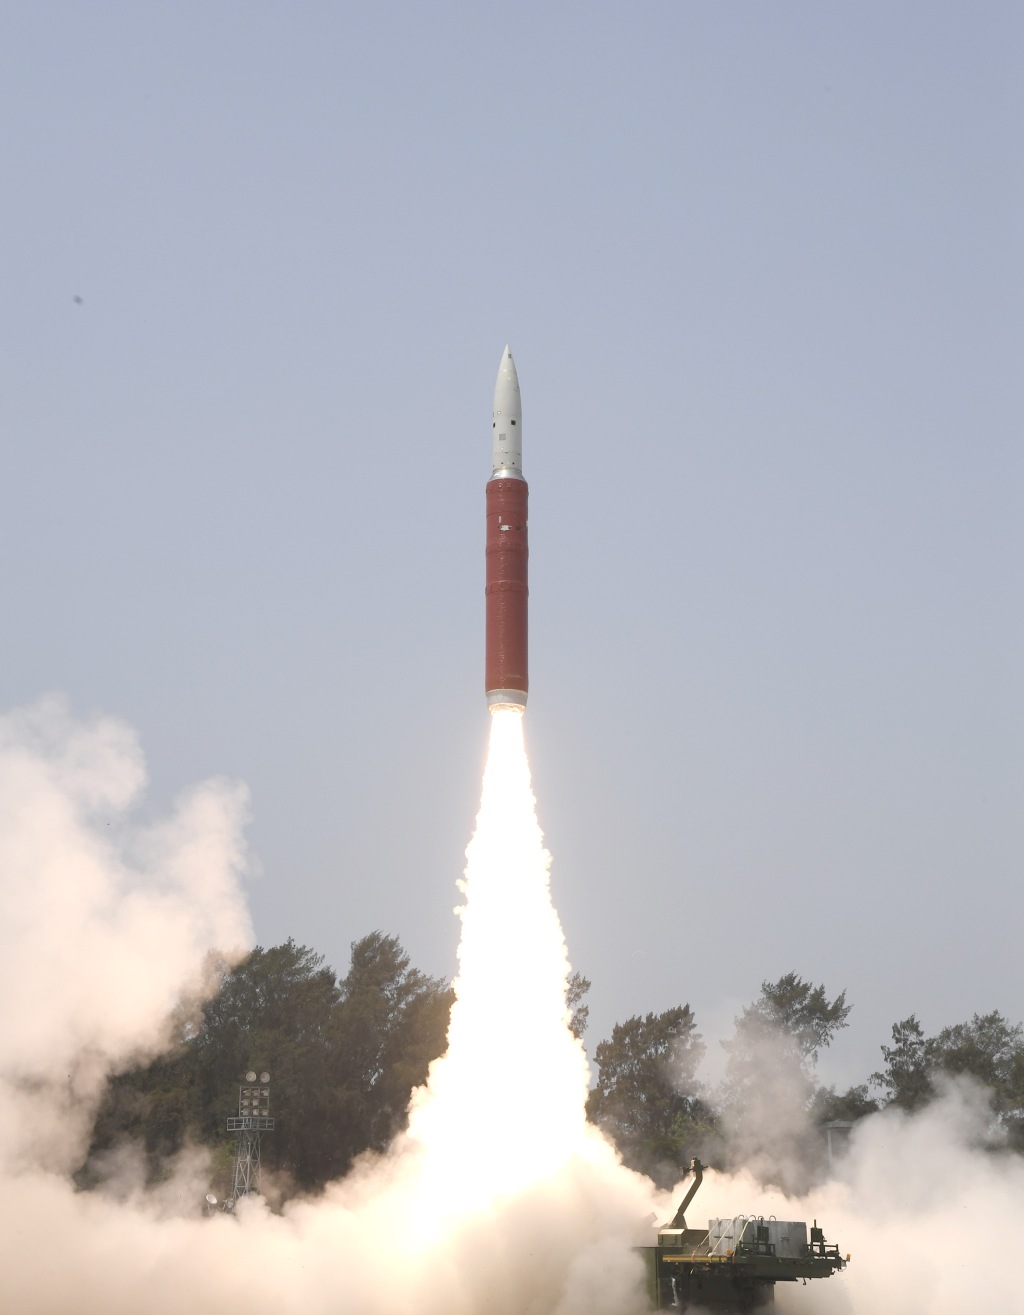 Can India protect itself against Ballistic Missile threats like Israel?